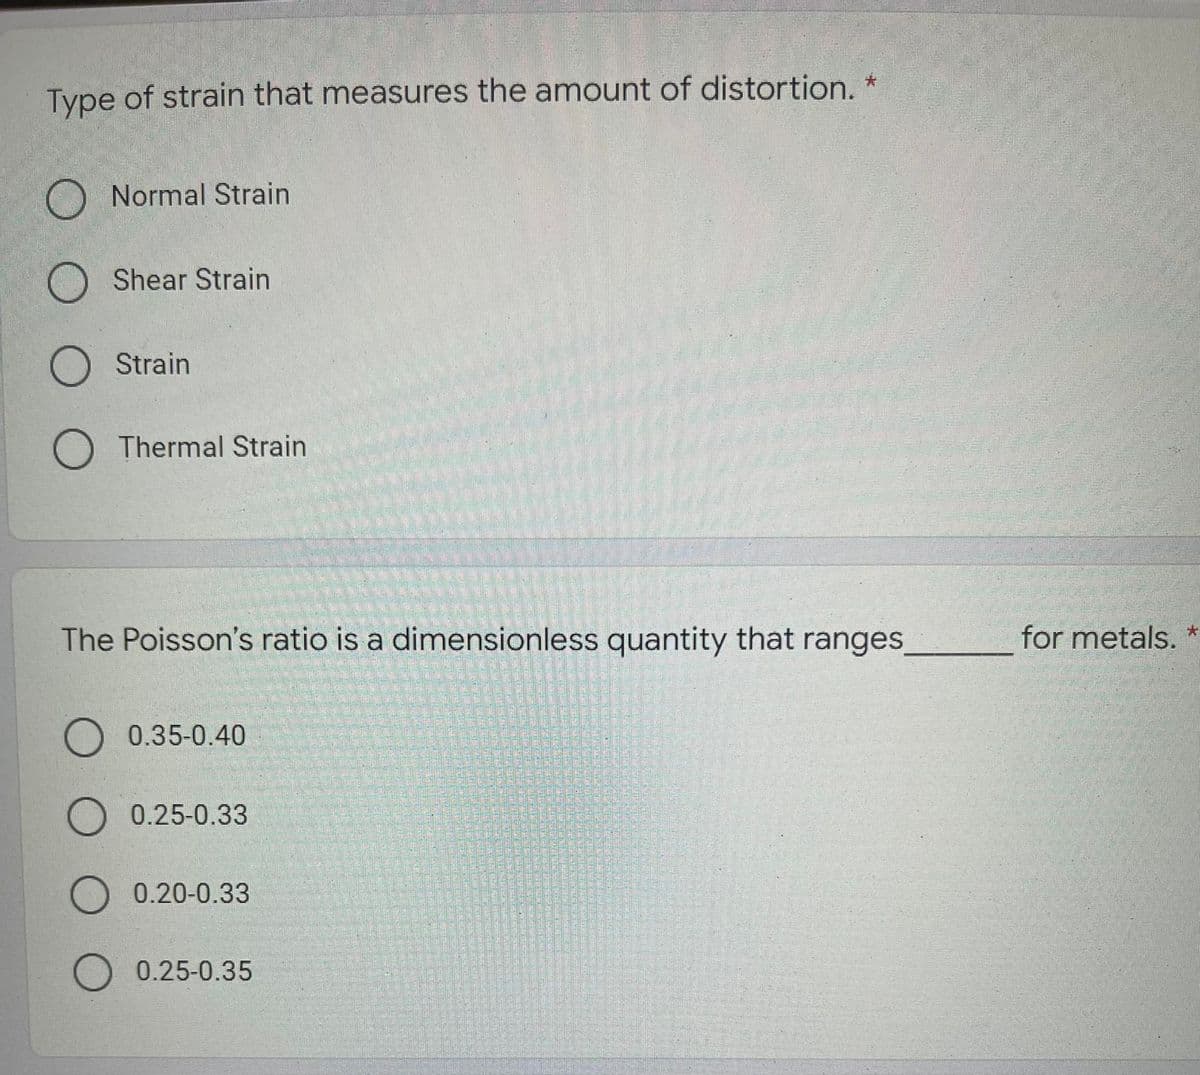 Type of strain that measures the amount of distortion. *
Normal Strain
Shear Strain
Strain
Thermal Strain
The Poisson's ratio is a dimensionless quantity that ranges,
for metals.
0.35-0.40
0.25-0.33
0.20-0.33
O 0.25-0.35
